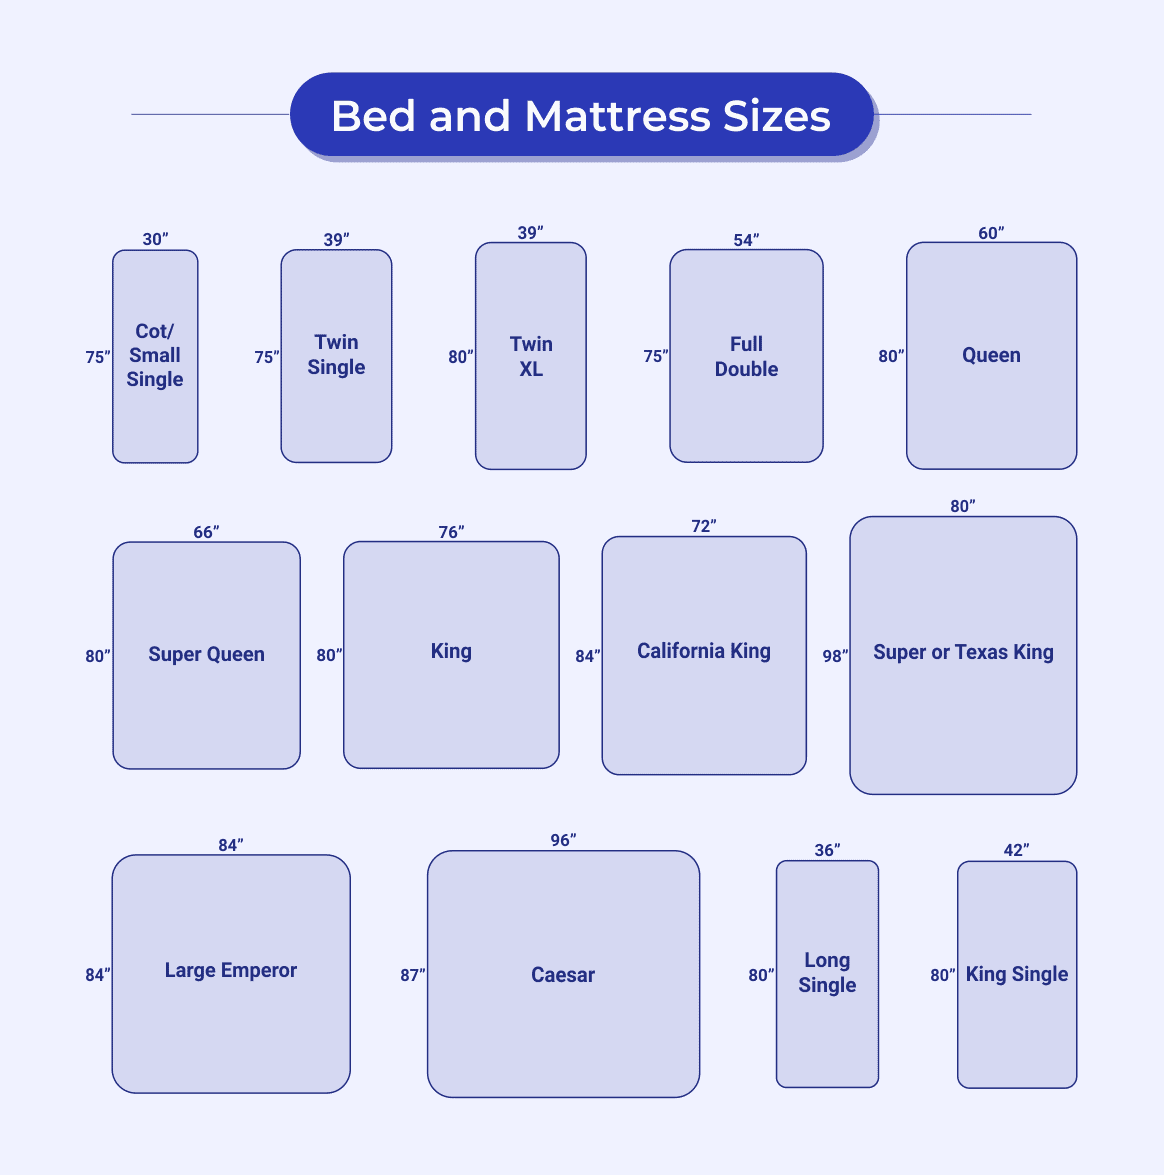 Mattress and Bed Sizes